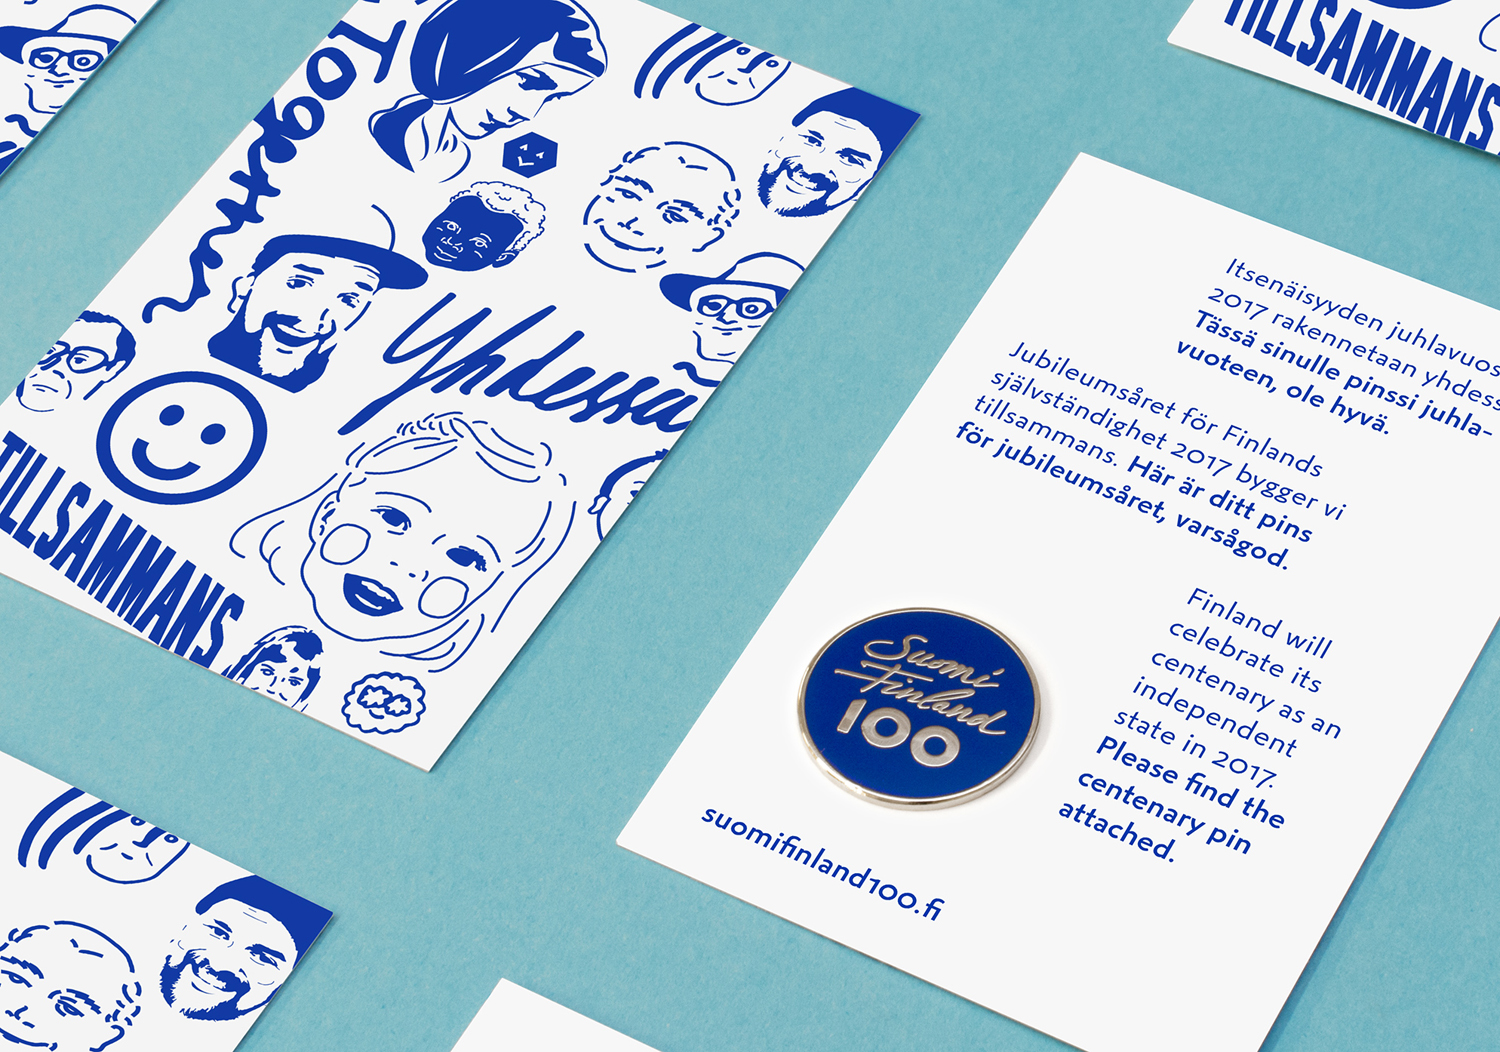 Illustration, print and packaging by Kokoro & Moi for the celebration of Finland's centenary